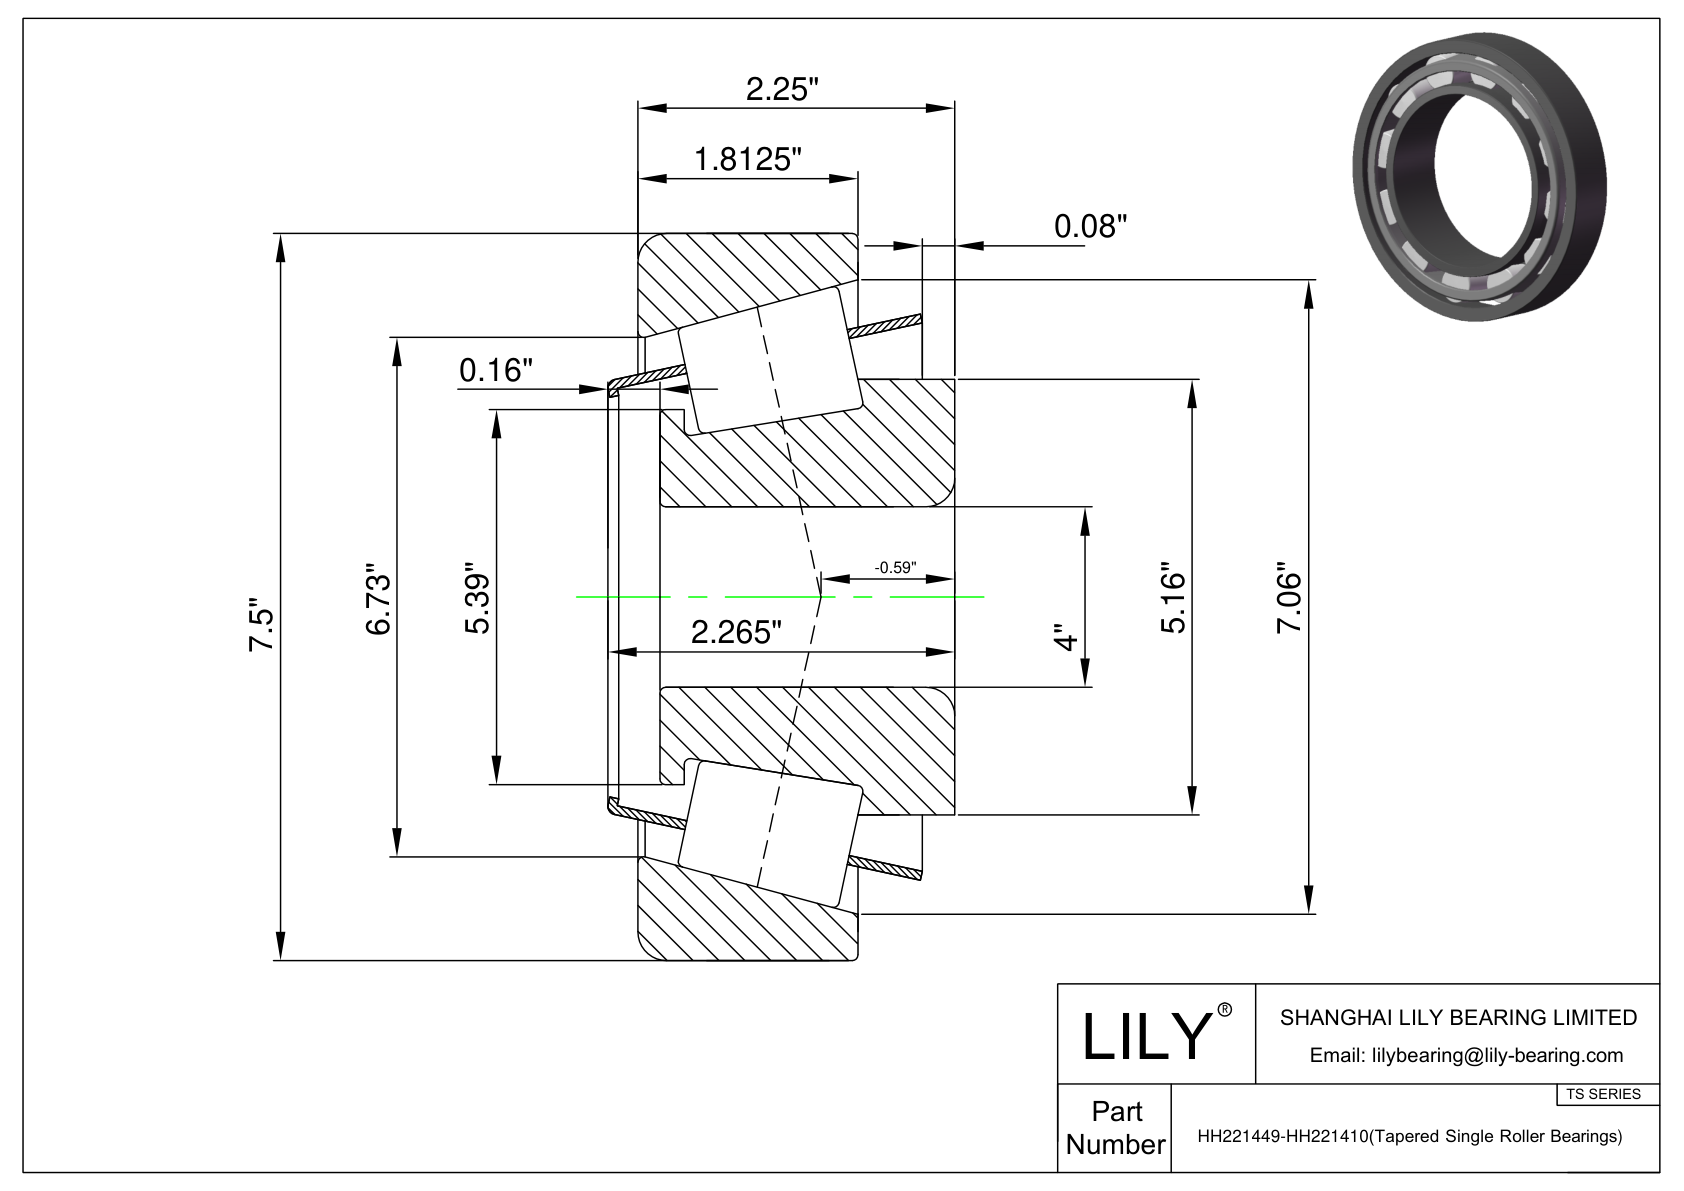 HH221449-HH221410 TS (Tapered Single Roller Bearings) (Imperial) cad drawing